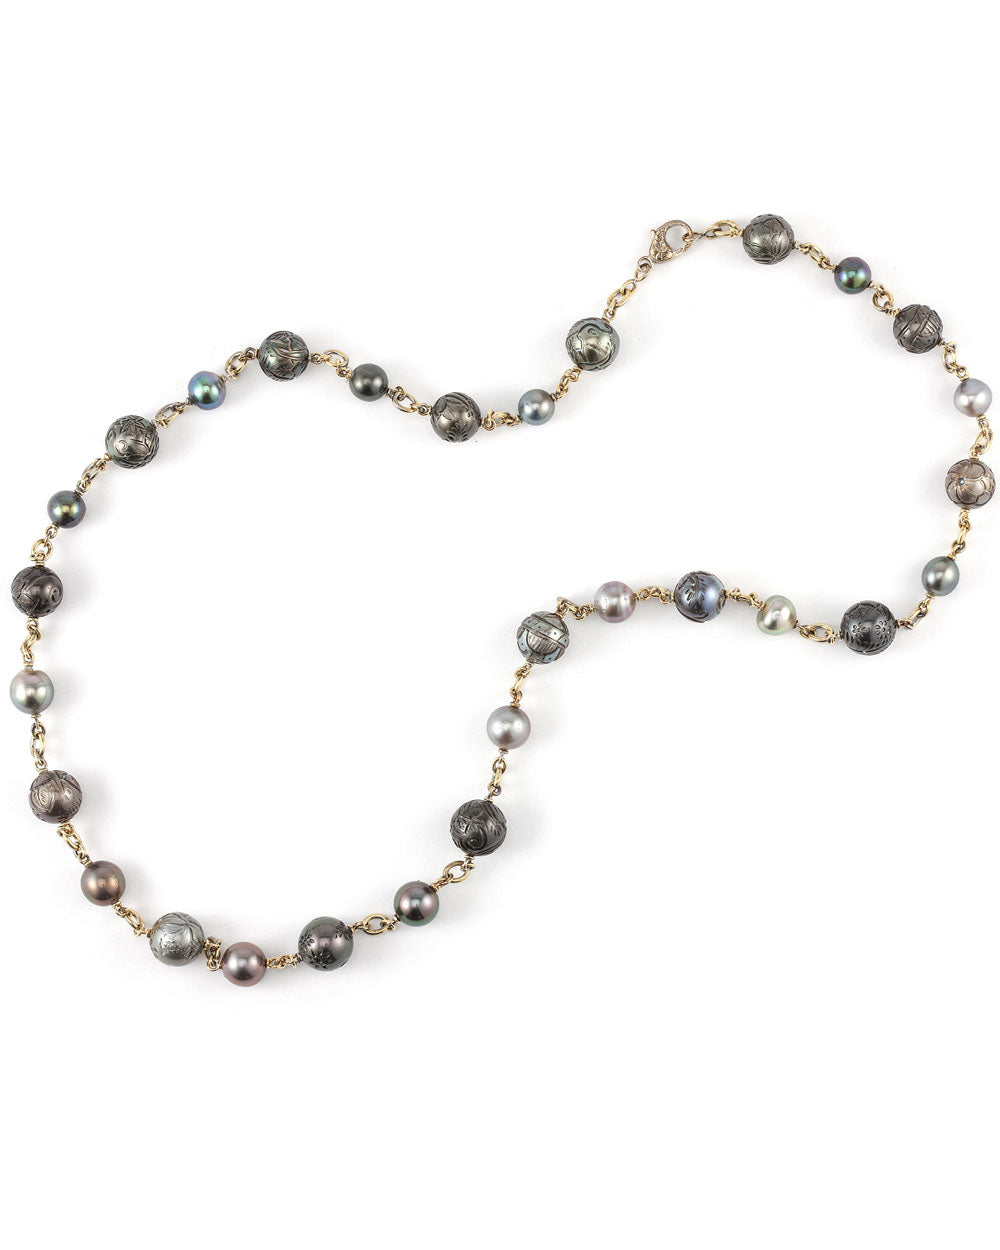 Carved South Sea Pearl Necklace